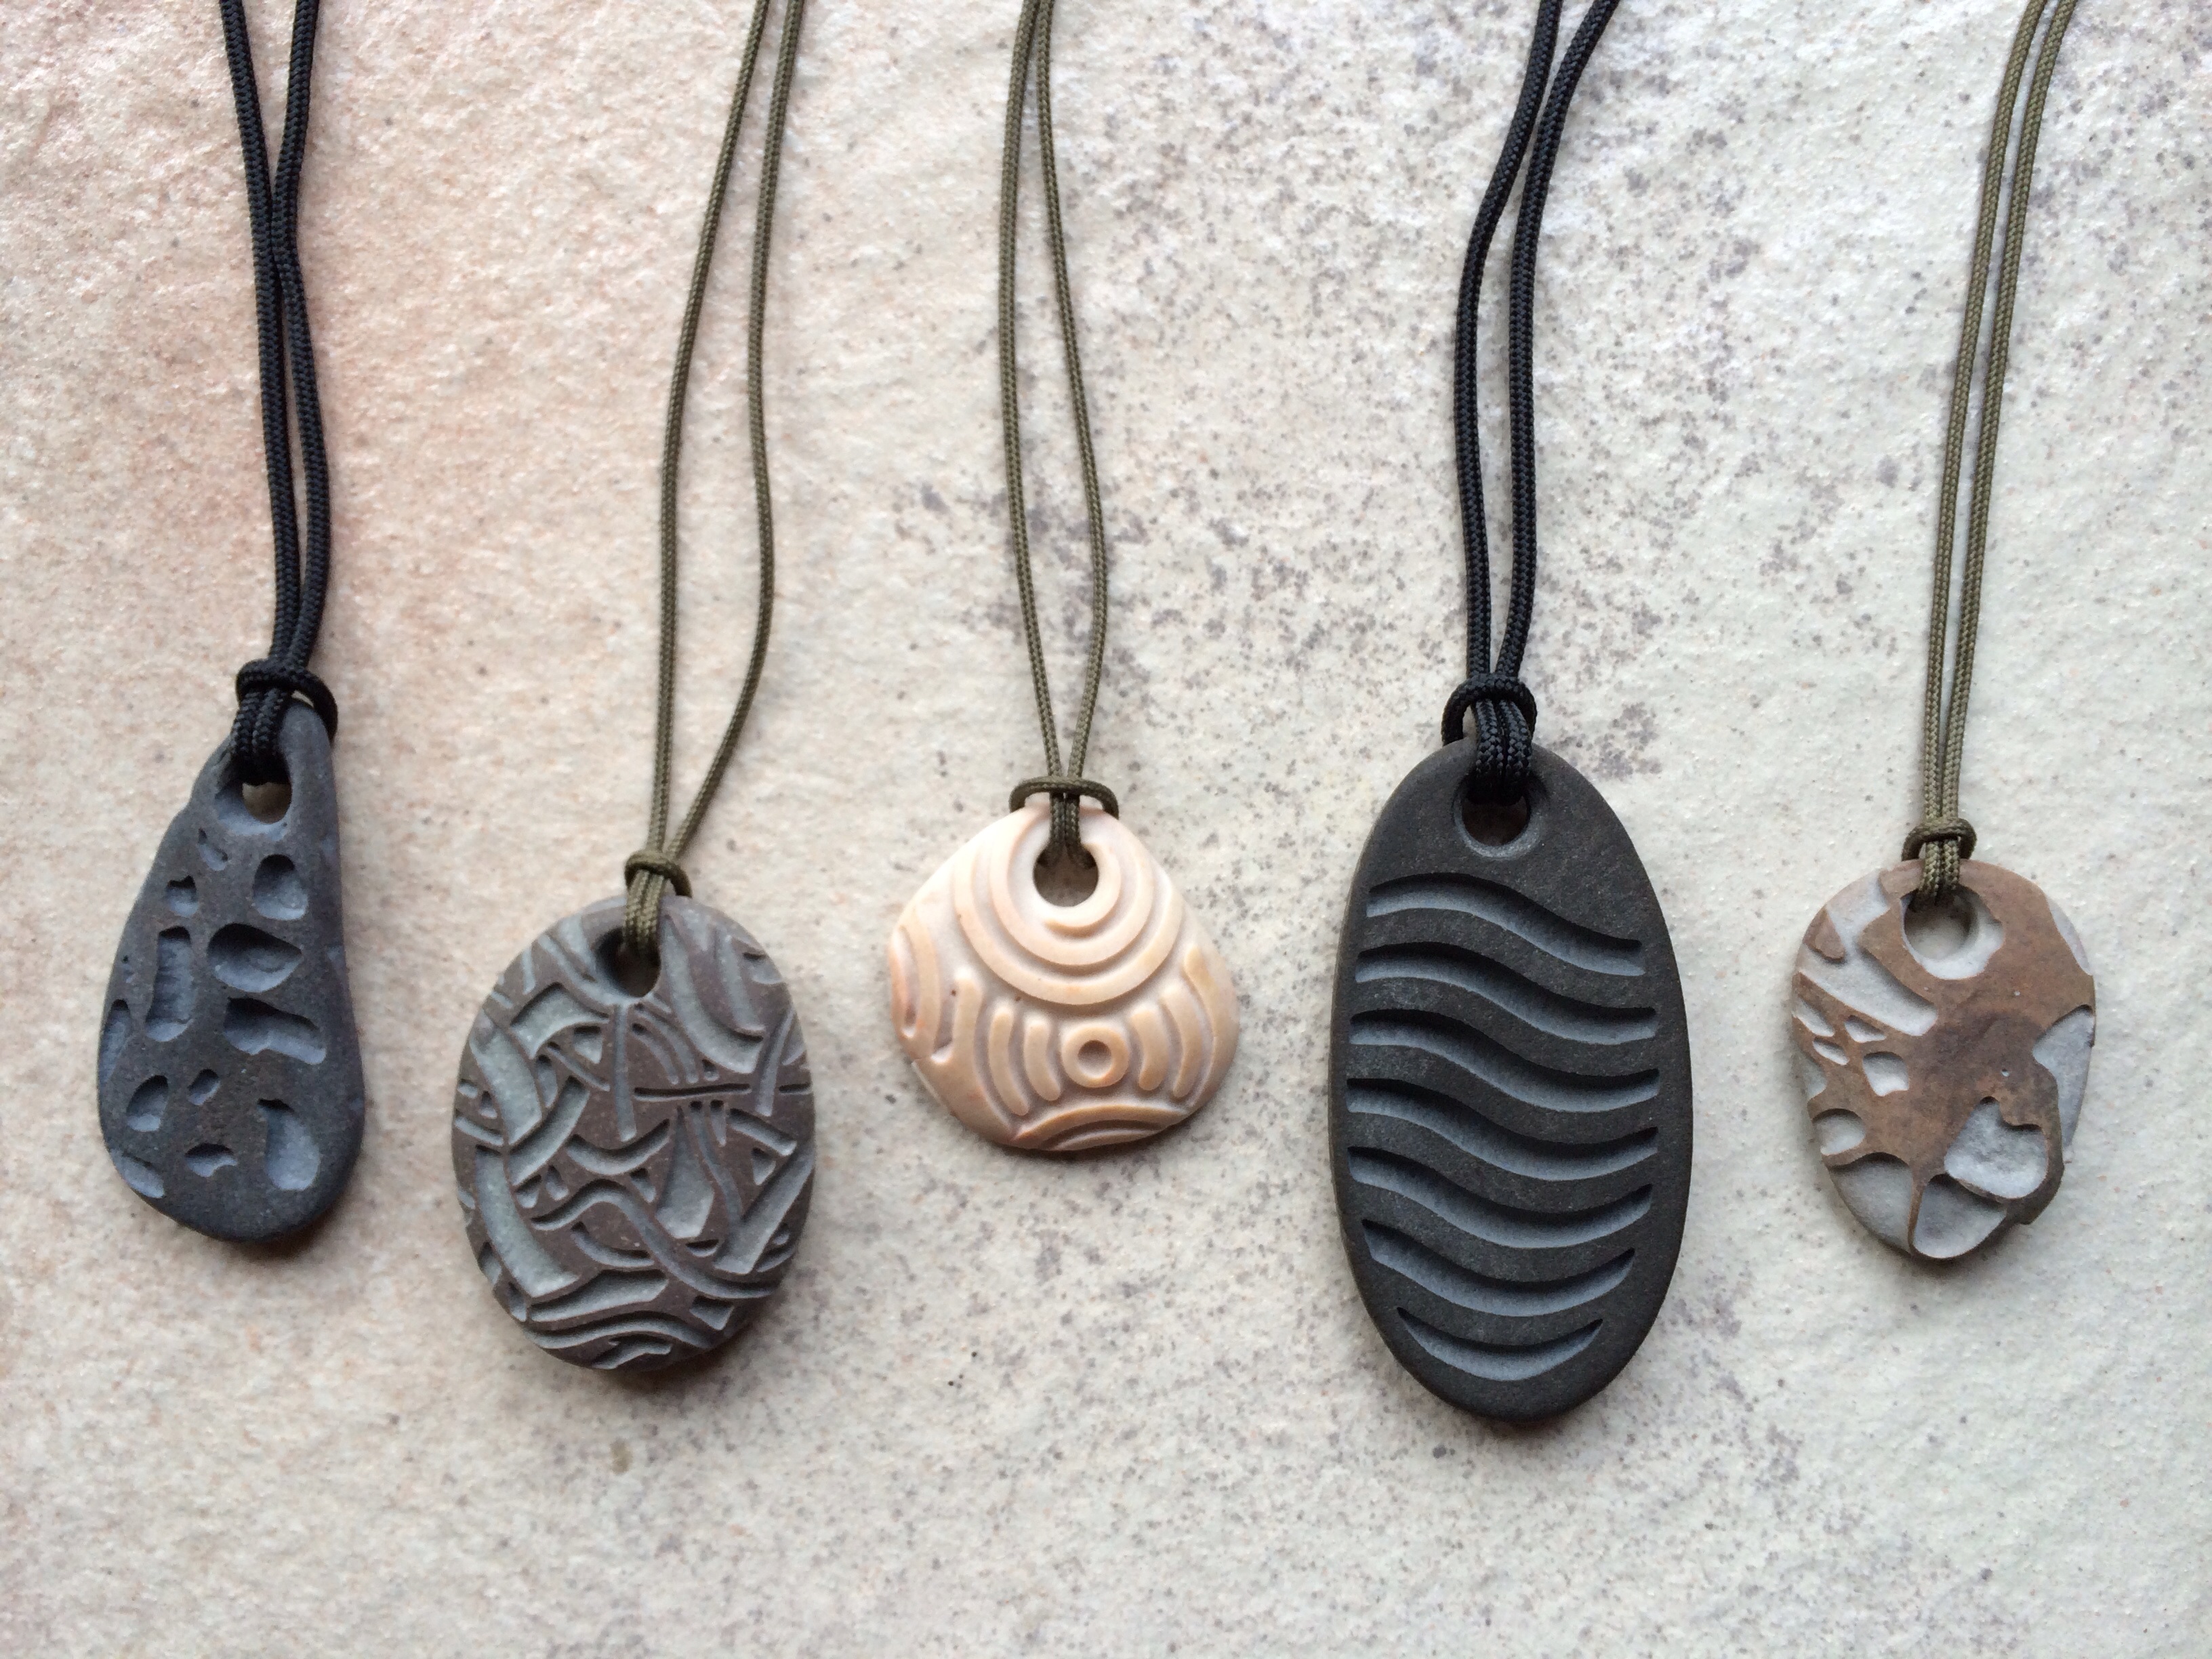 Pendants, after coring a hole for the pendant cord, I place a template over each stone and sandblast a specific design. Most are basalt, 1" to 2" long. 